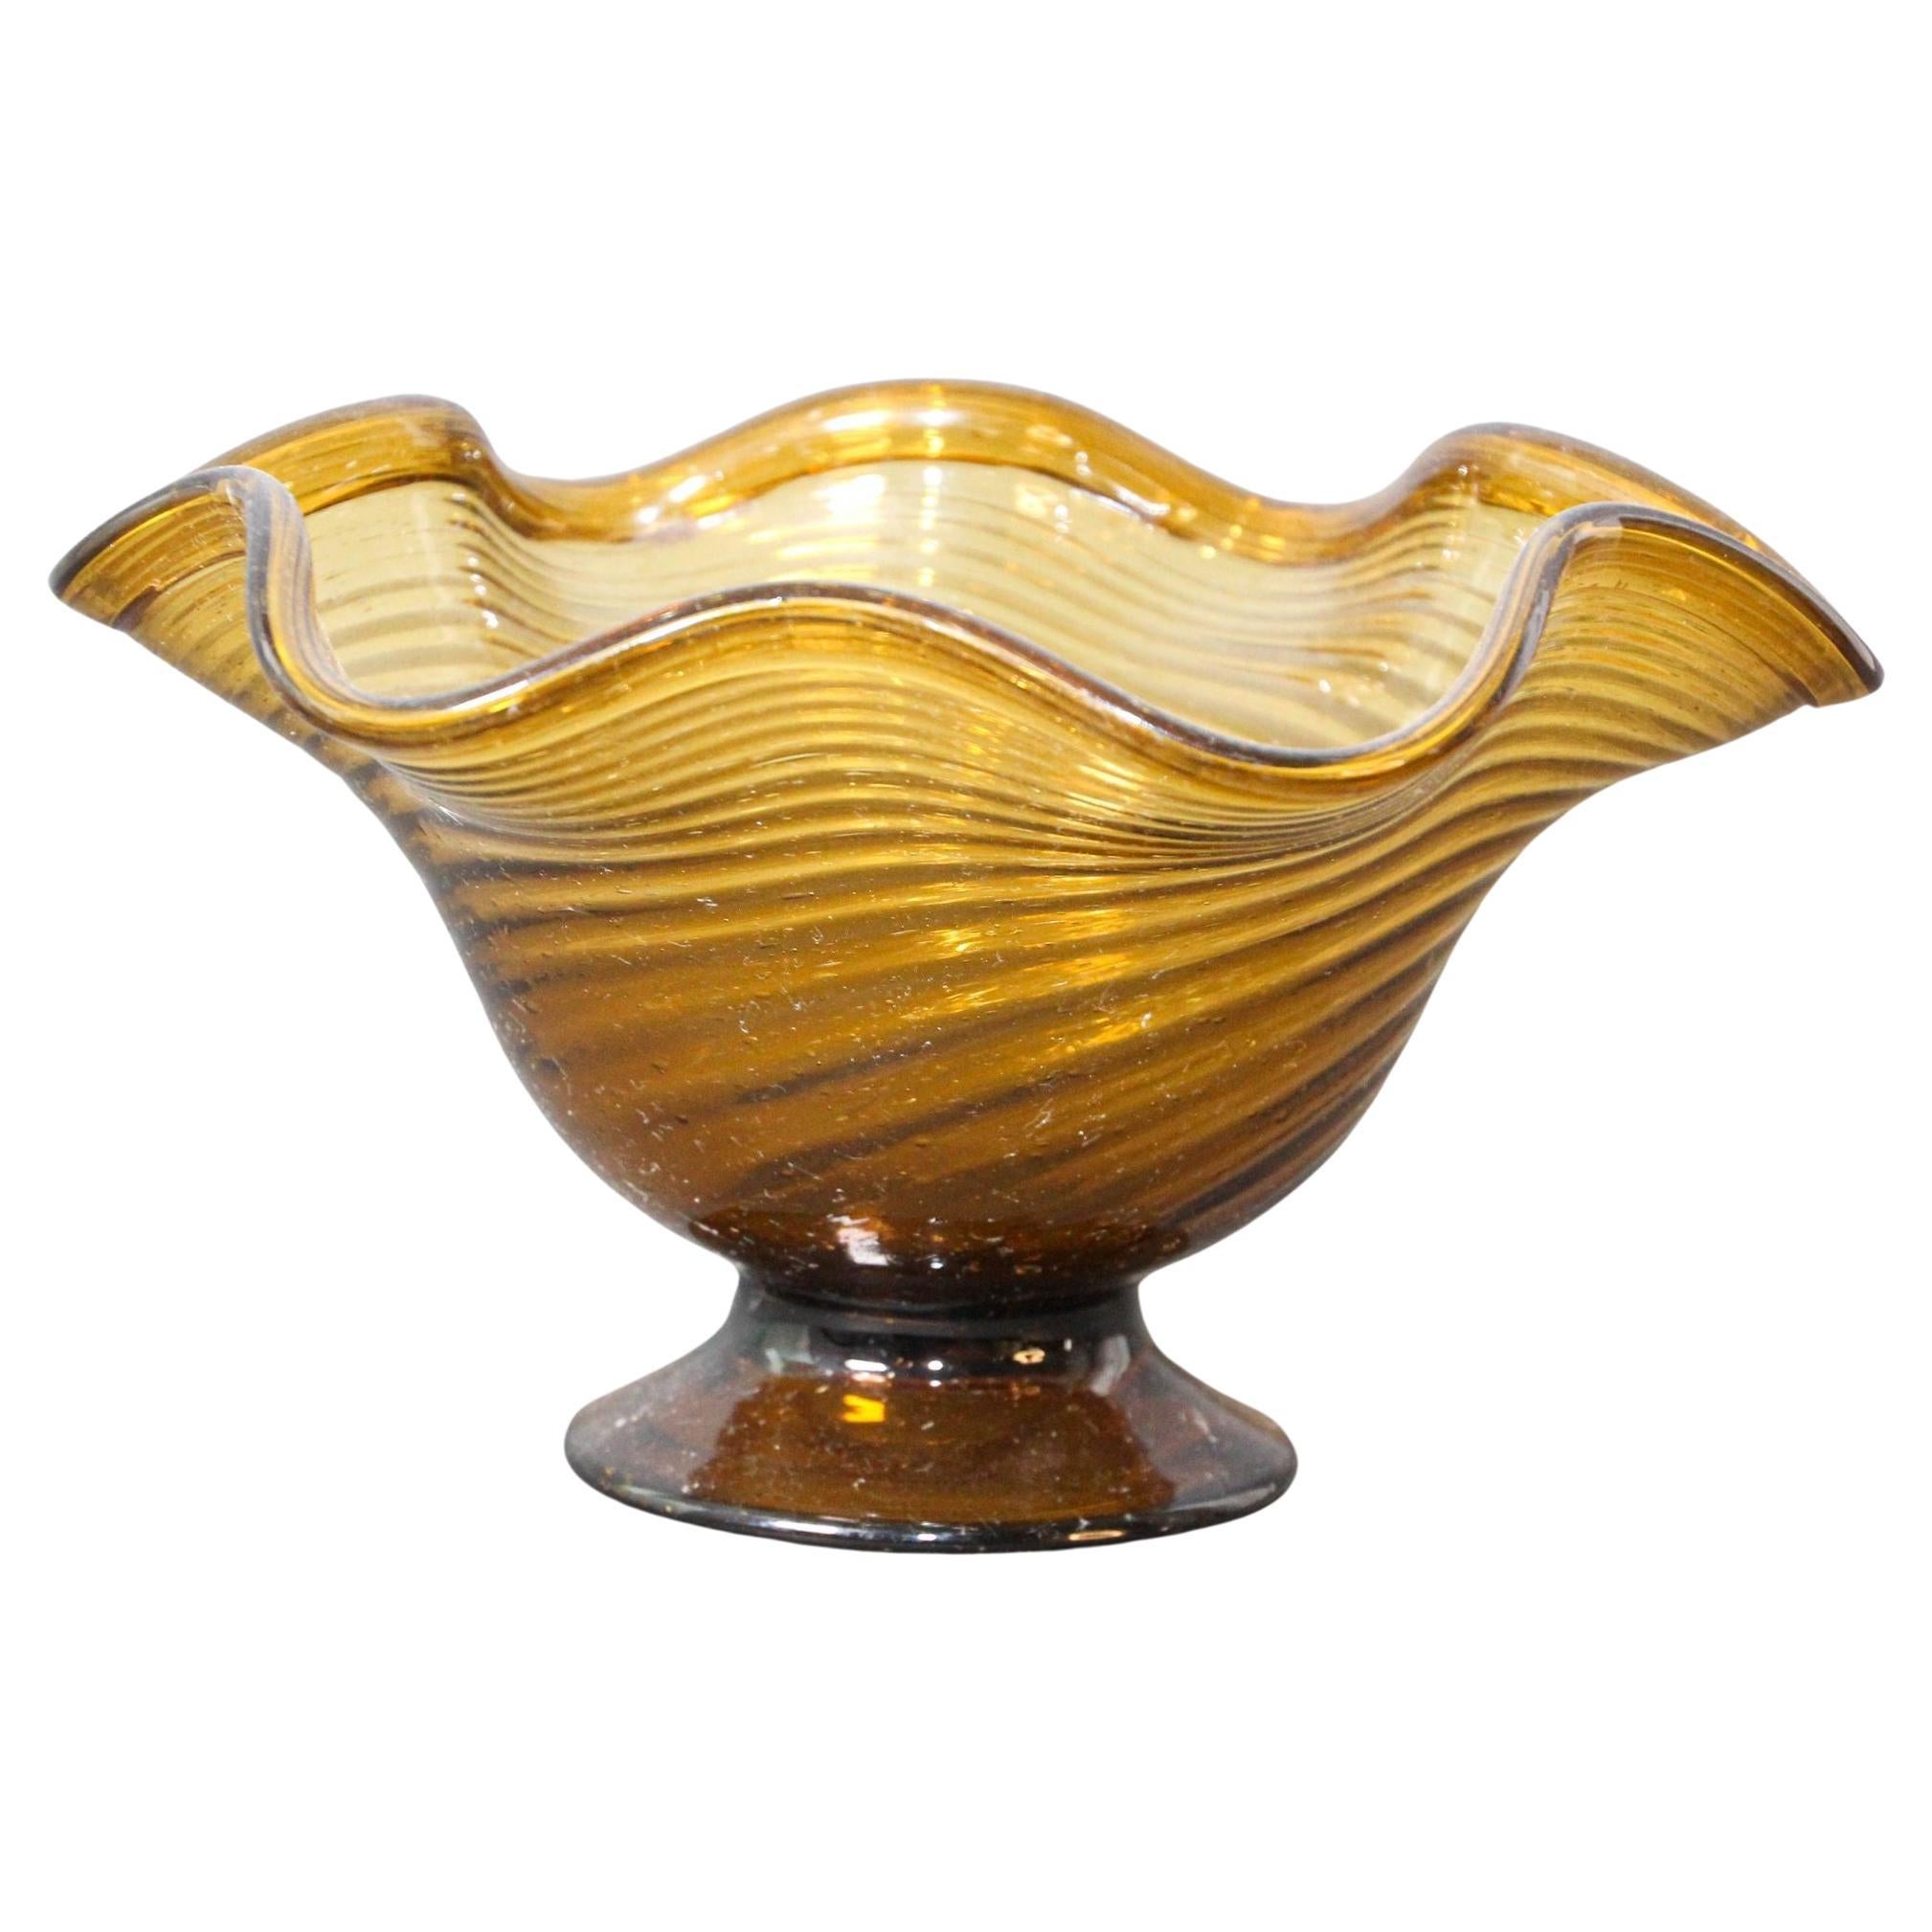 Vintage Amber Murano Art Glass Decorative Footed Fruit Bowl 1960s Italy For Sale